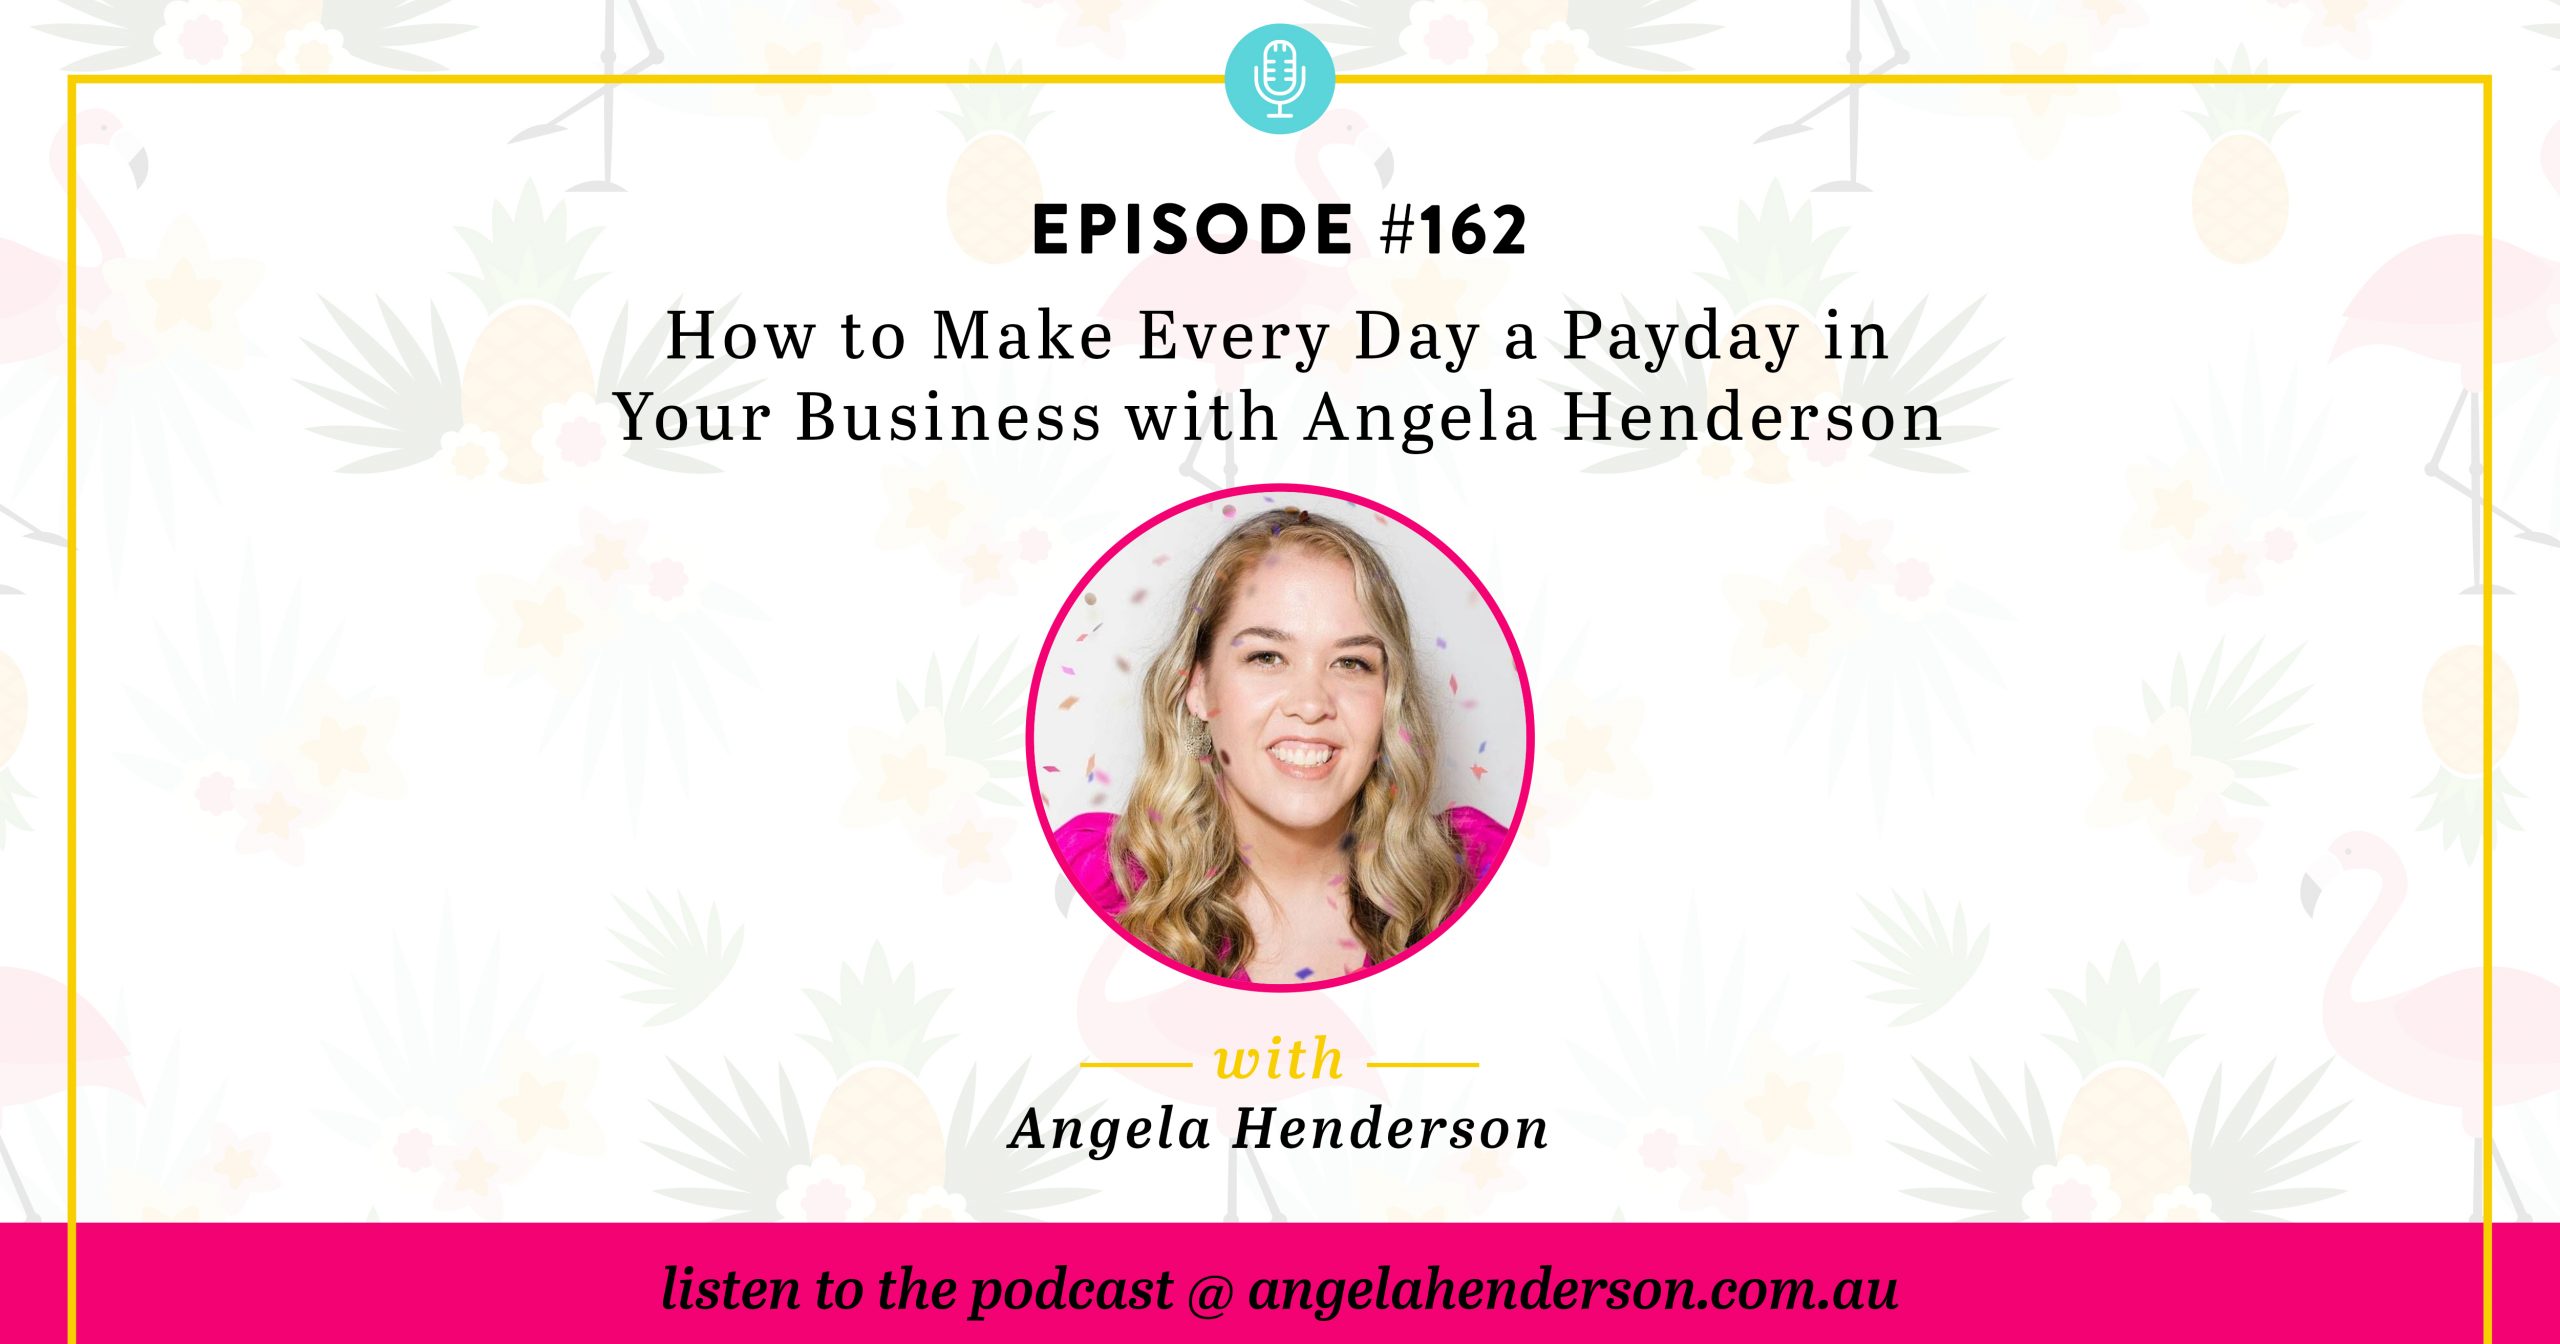 How to Make Every Day a Payday in Your Business